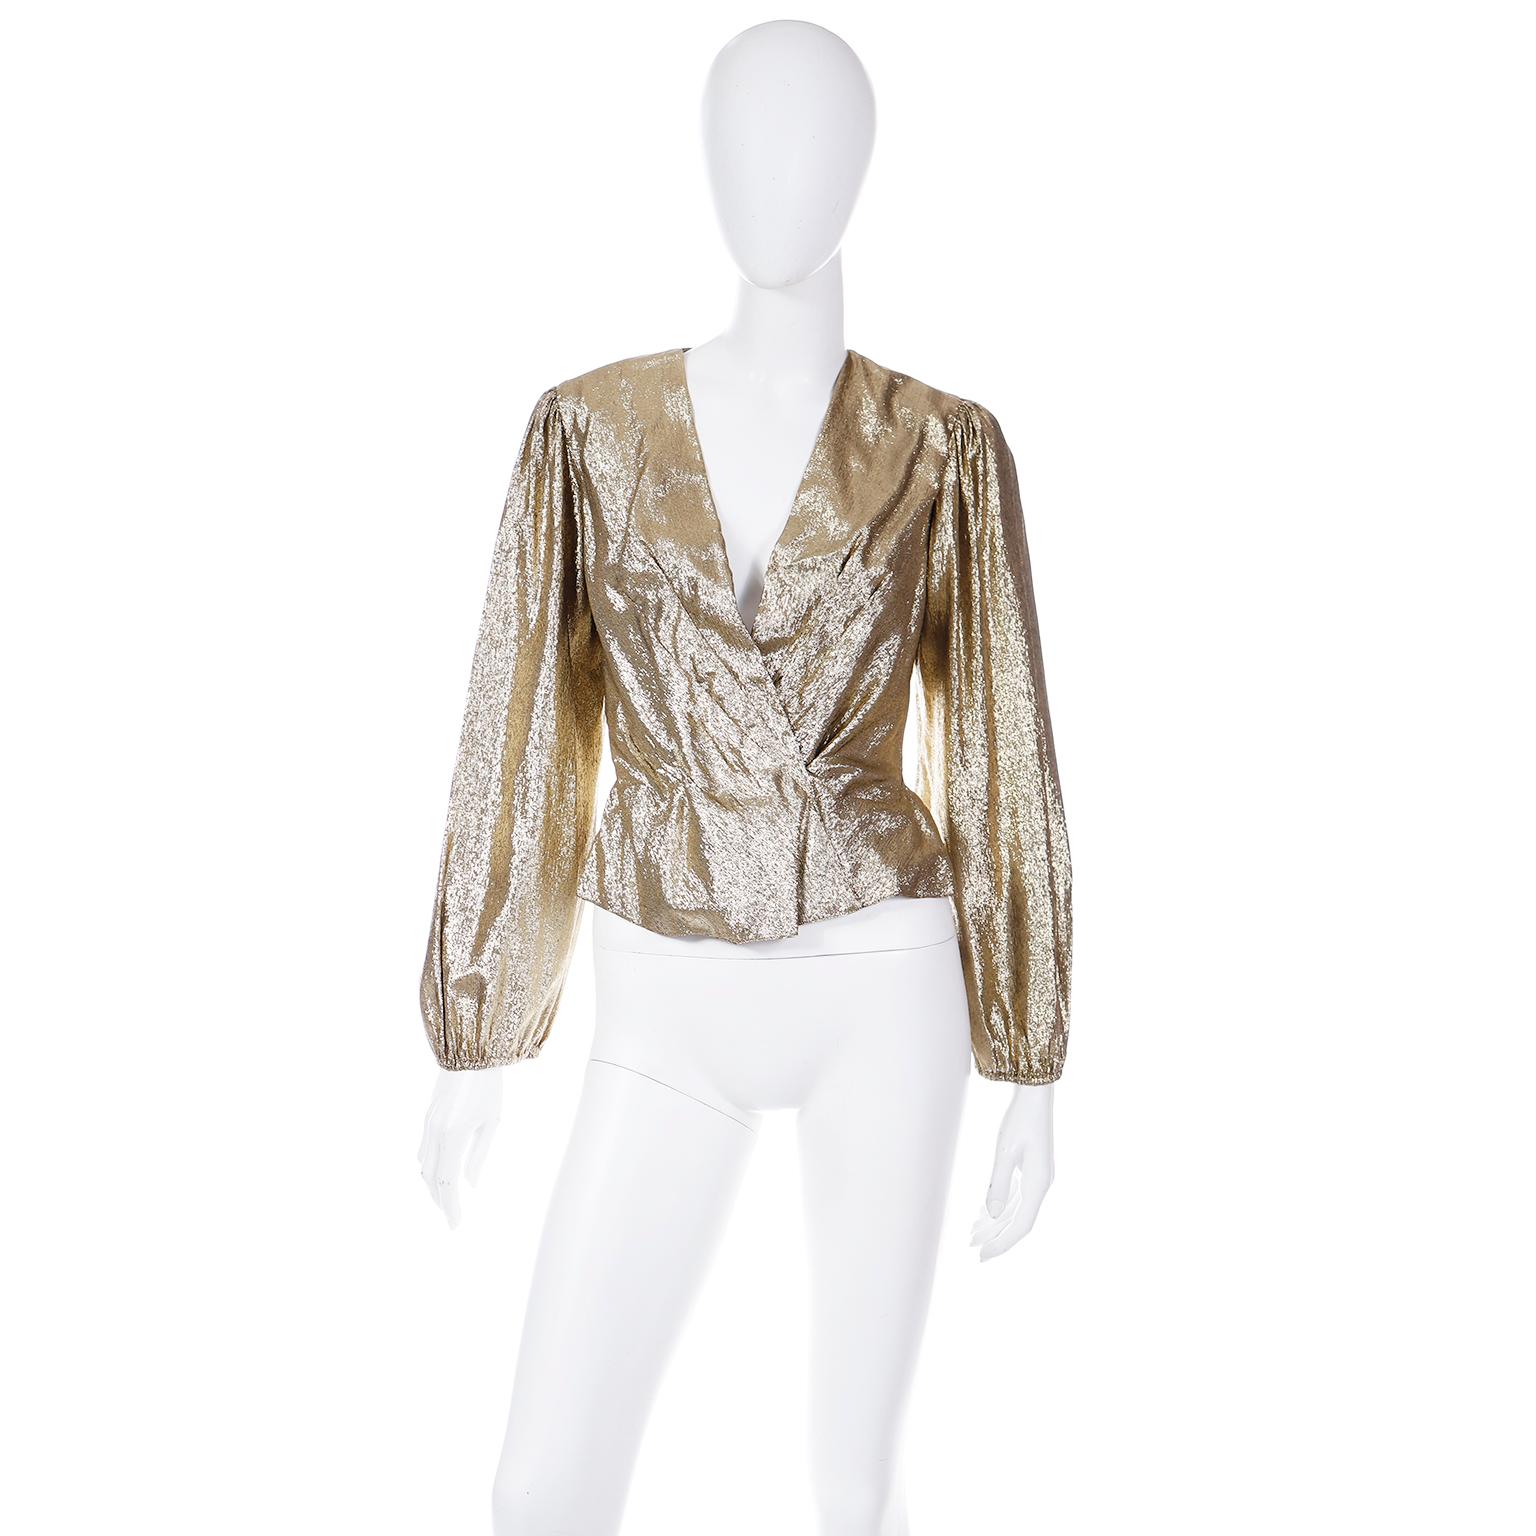 This stunning vintage gold lame blouse was designed by Pauline Trigere for Bergdorf Goodman in the late 1970's. The blouse is hard to show in photos, but it is one of those pieces that you will love having in your closet! This beautiful top has